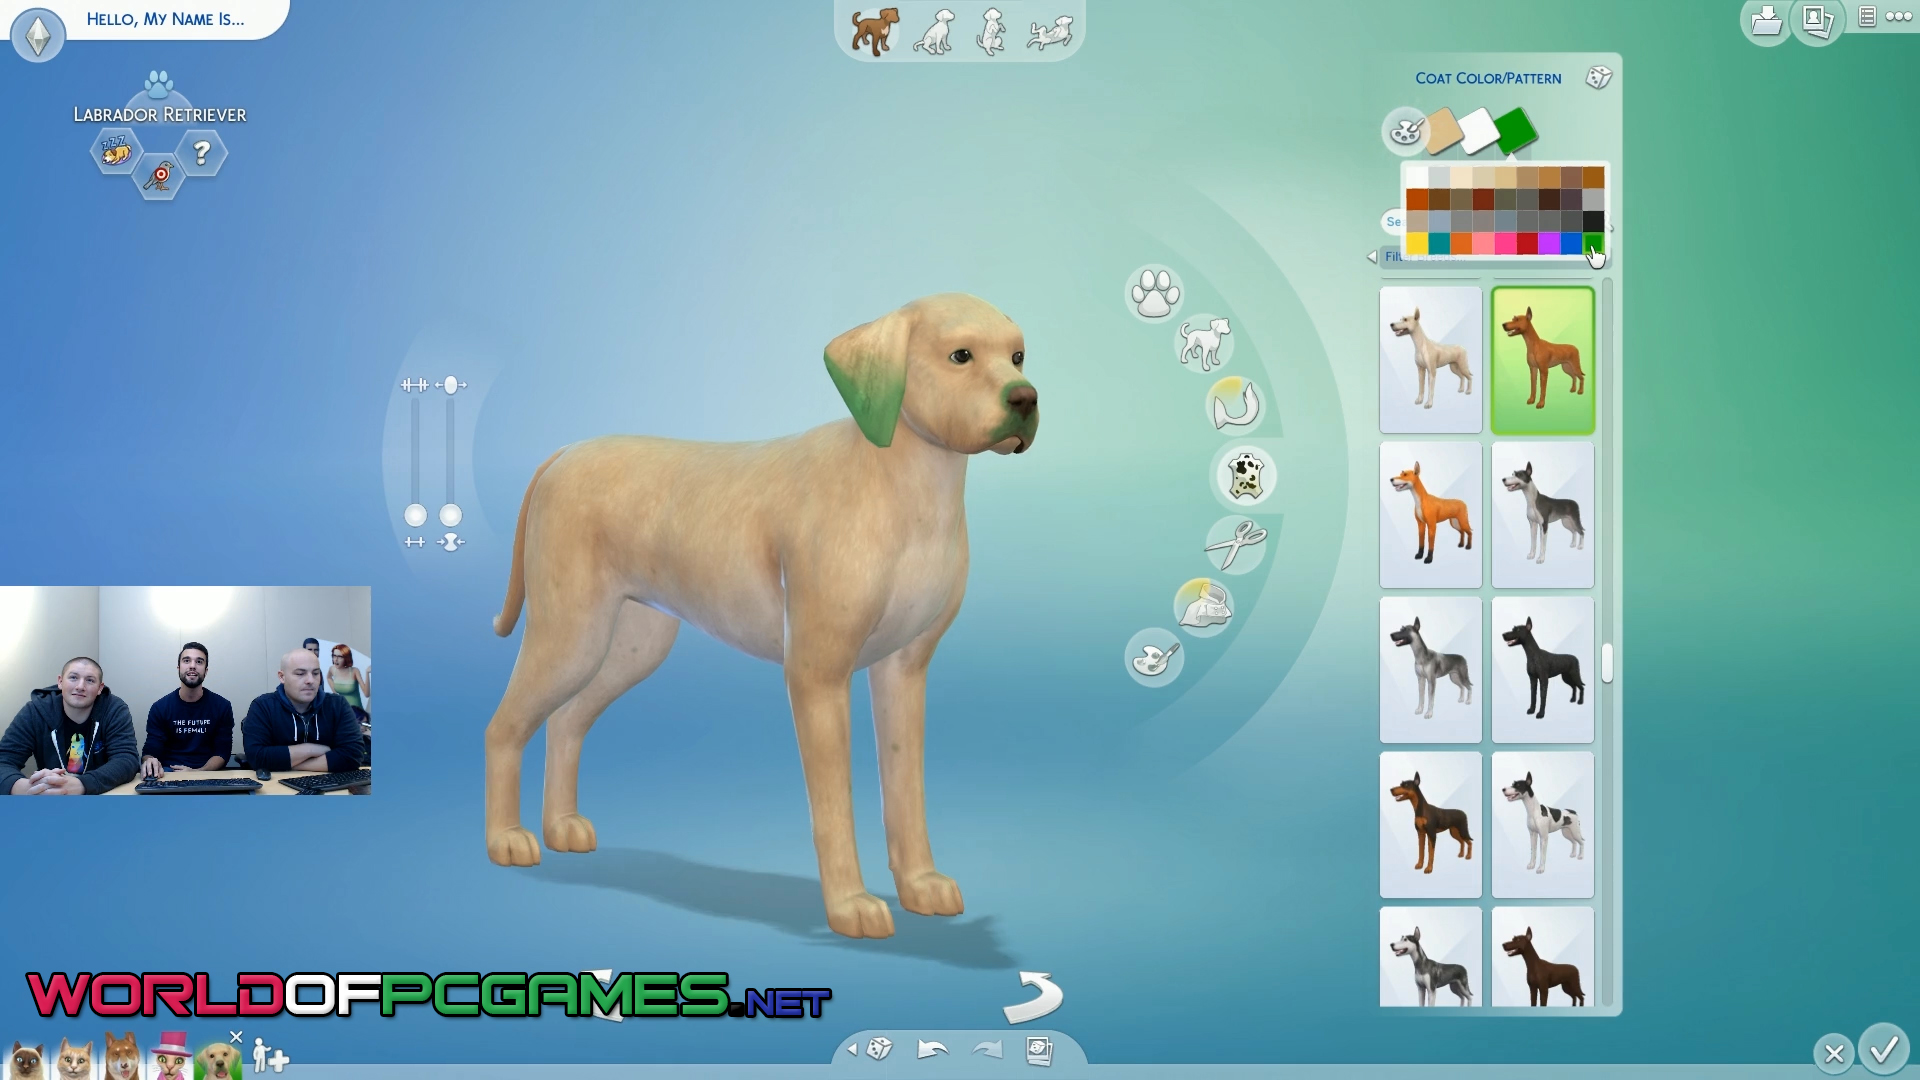 The Sims 4 Cats And Dogs Free Download By worldof-pcgames.net